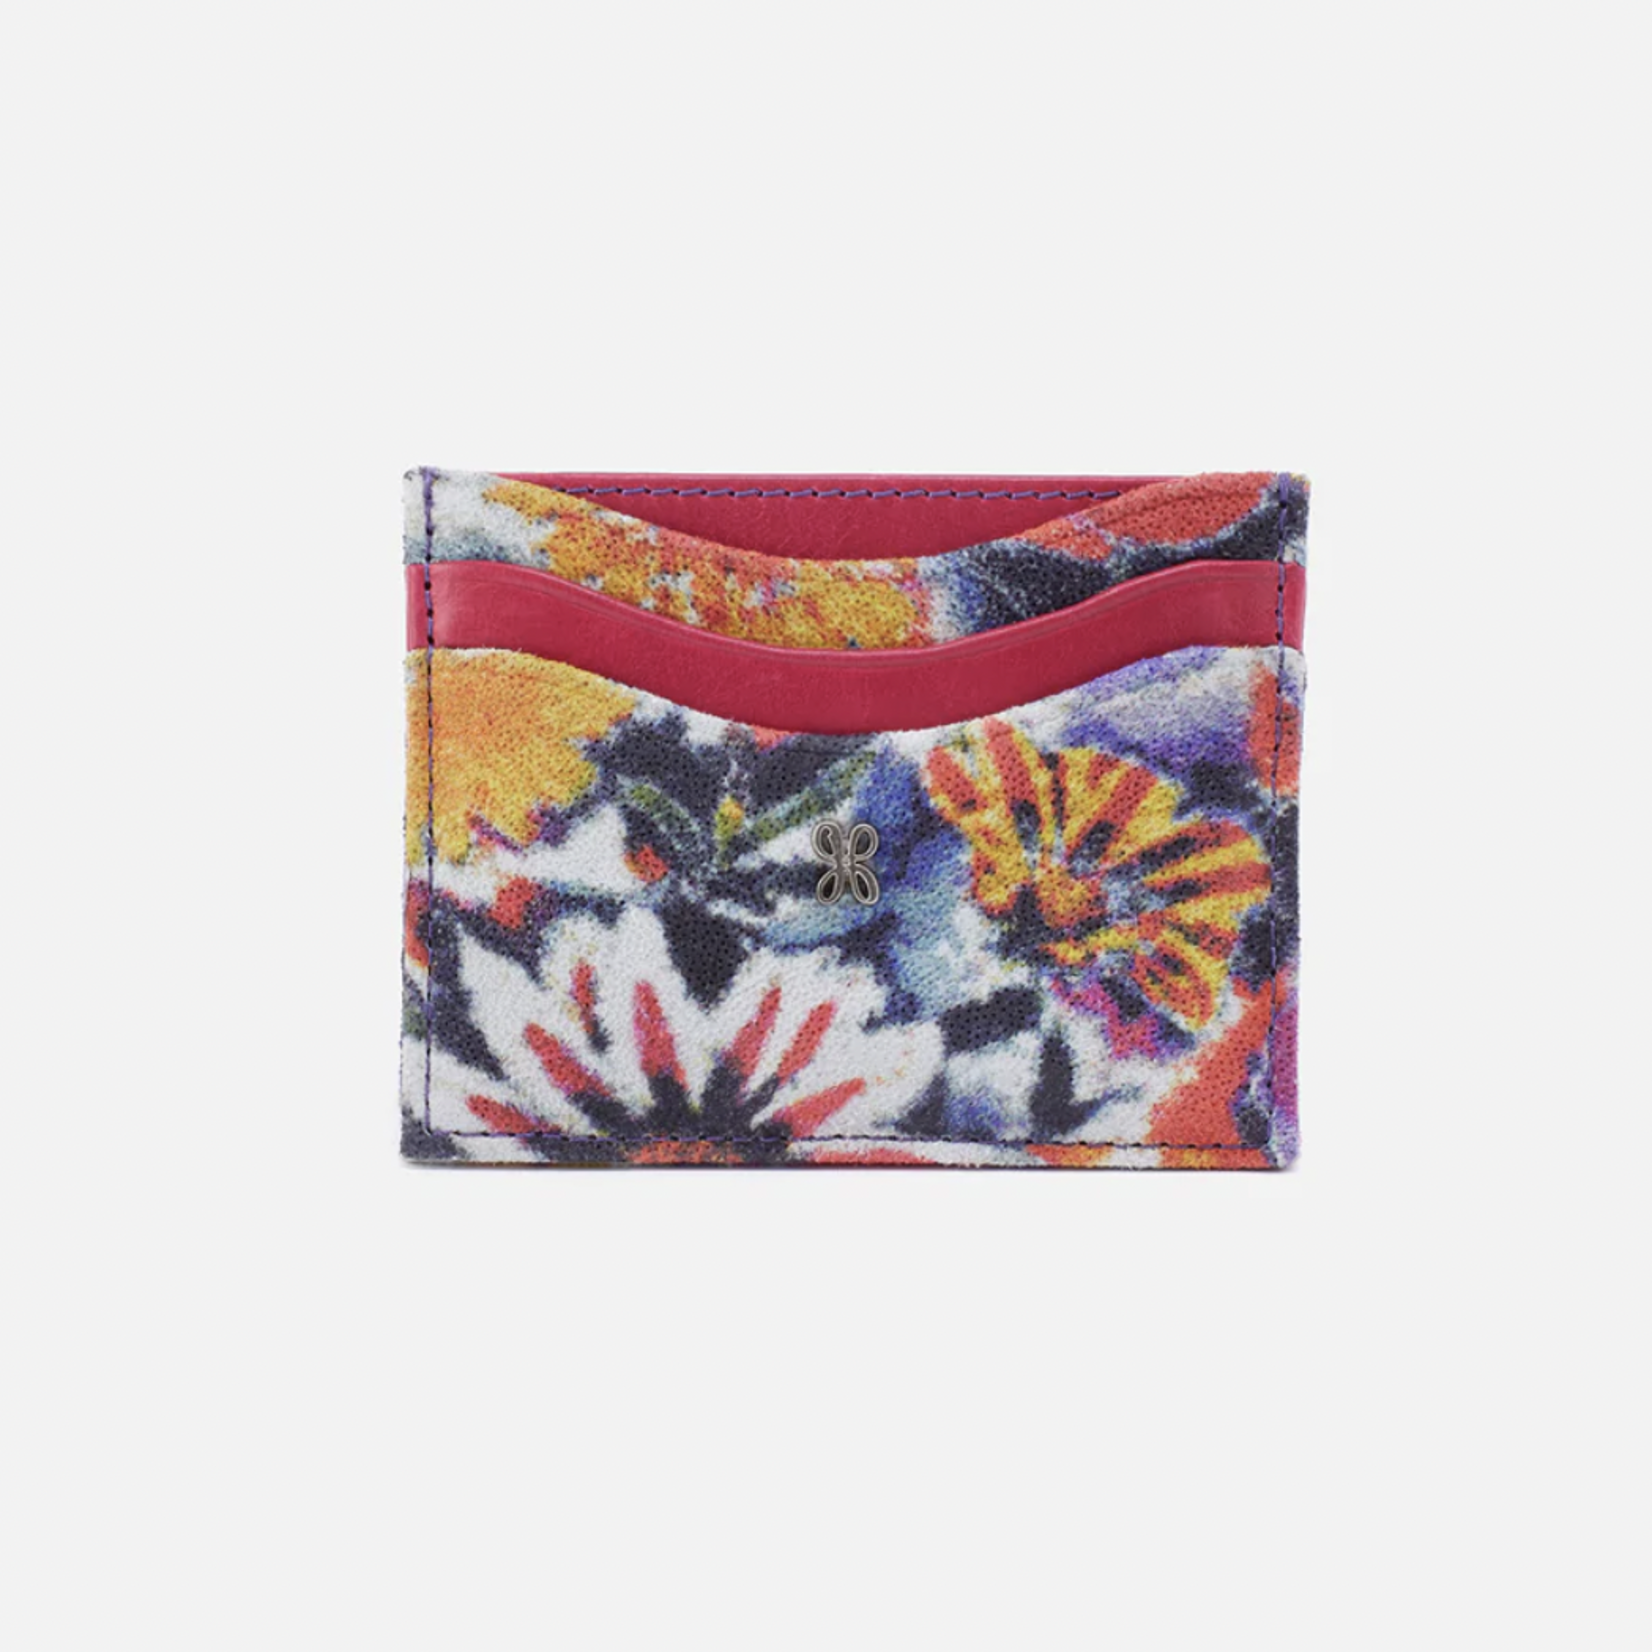 HOBO HOBO - Max Card Case Poppy Floral Printed Leather